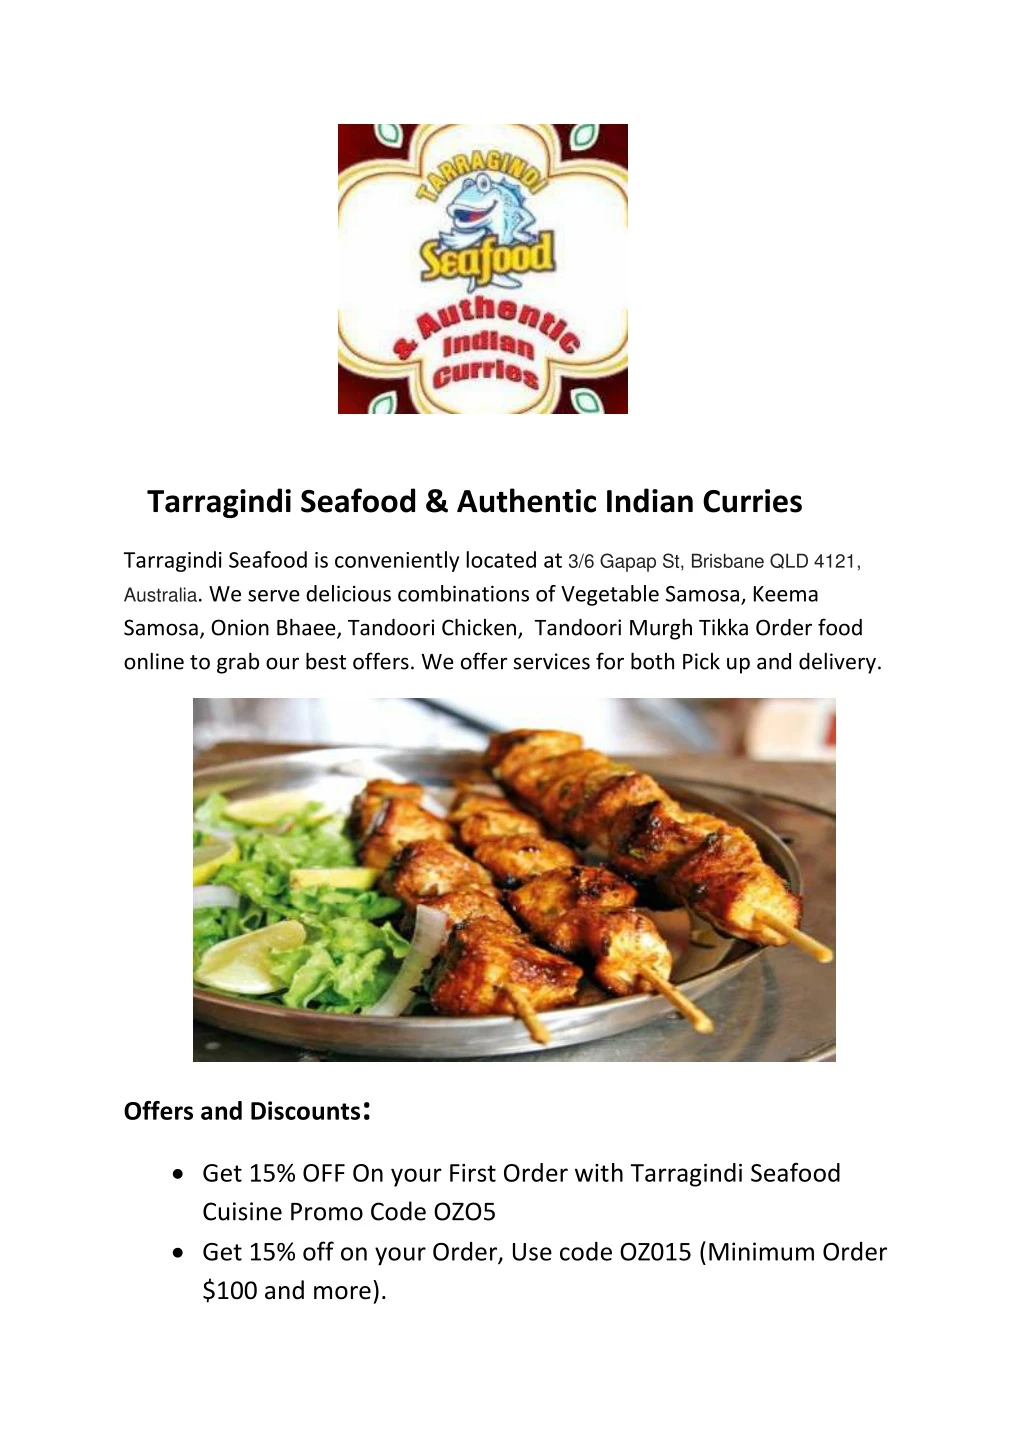 tarragindi seafood authentic indian curries